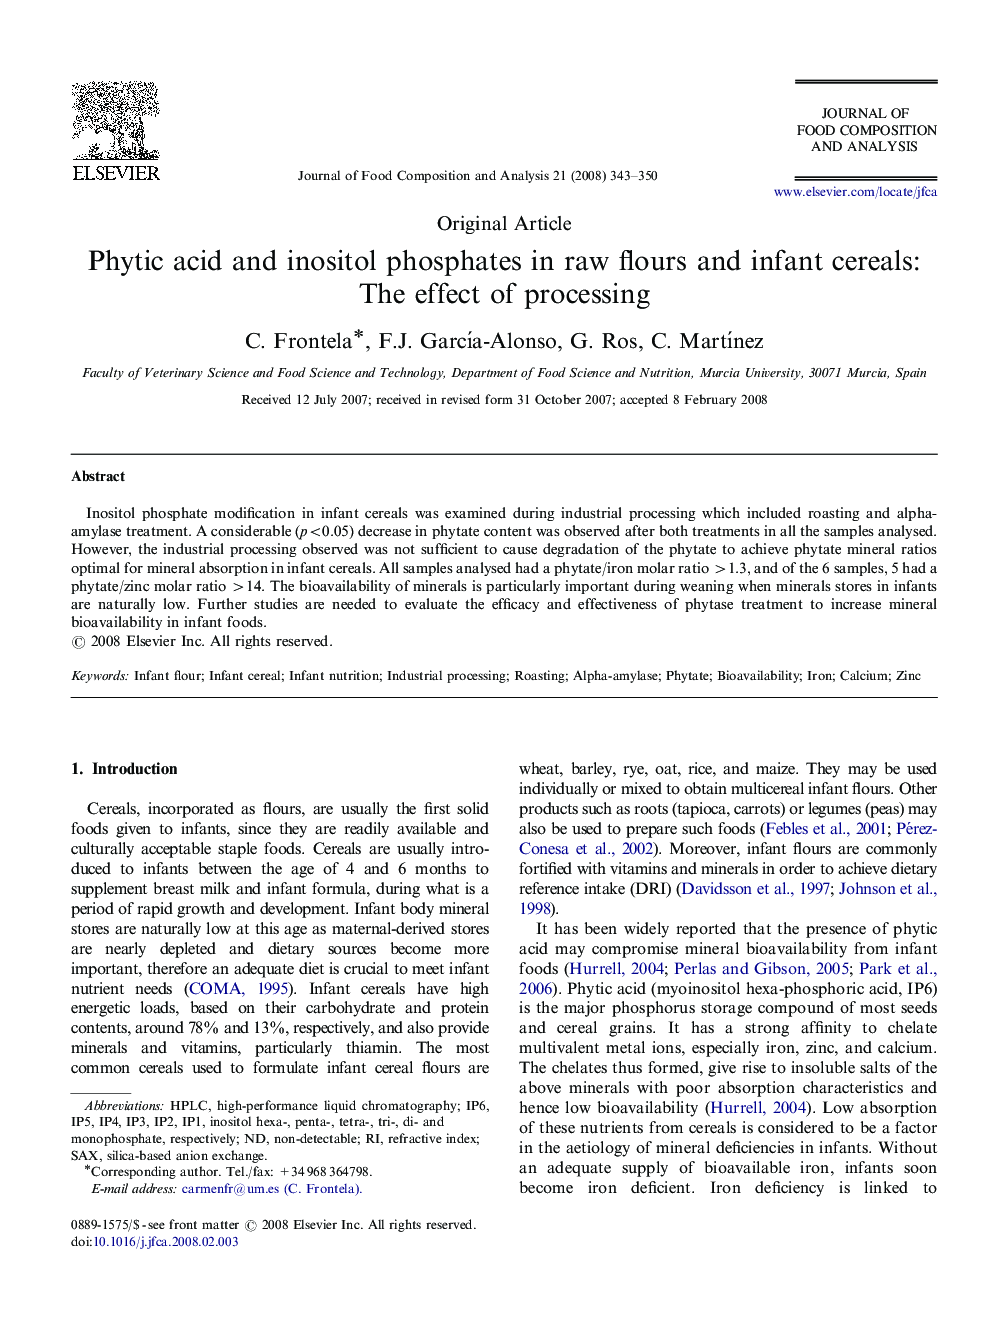 Phytic acid and inositol phosphates in raw flours and infant cereals: The effect of processing